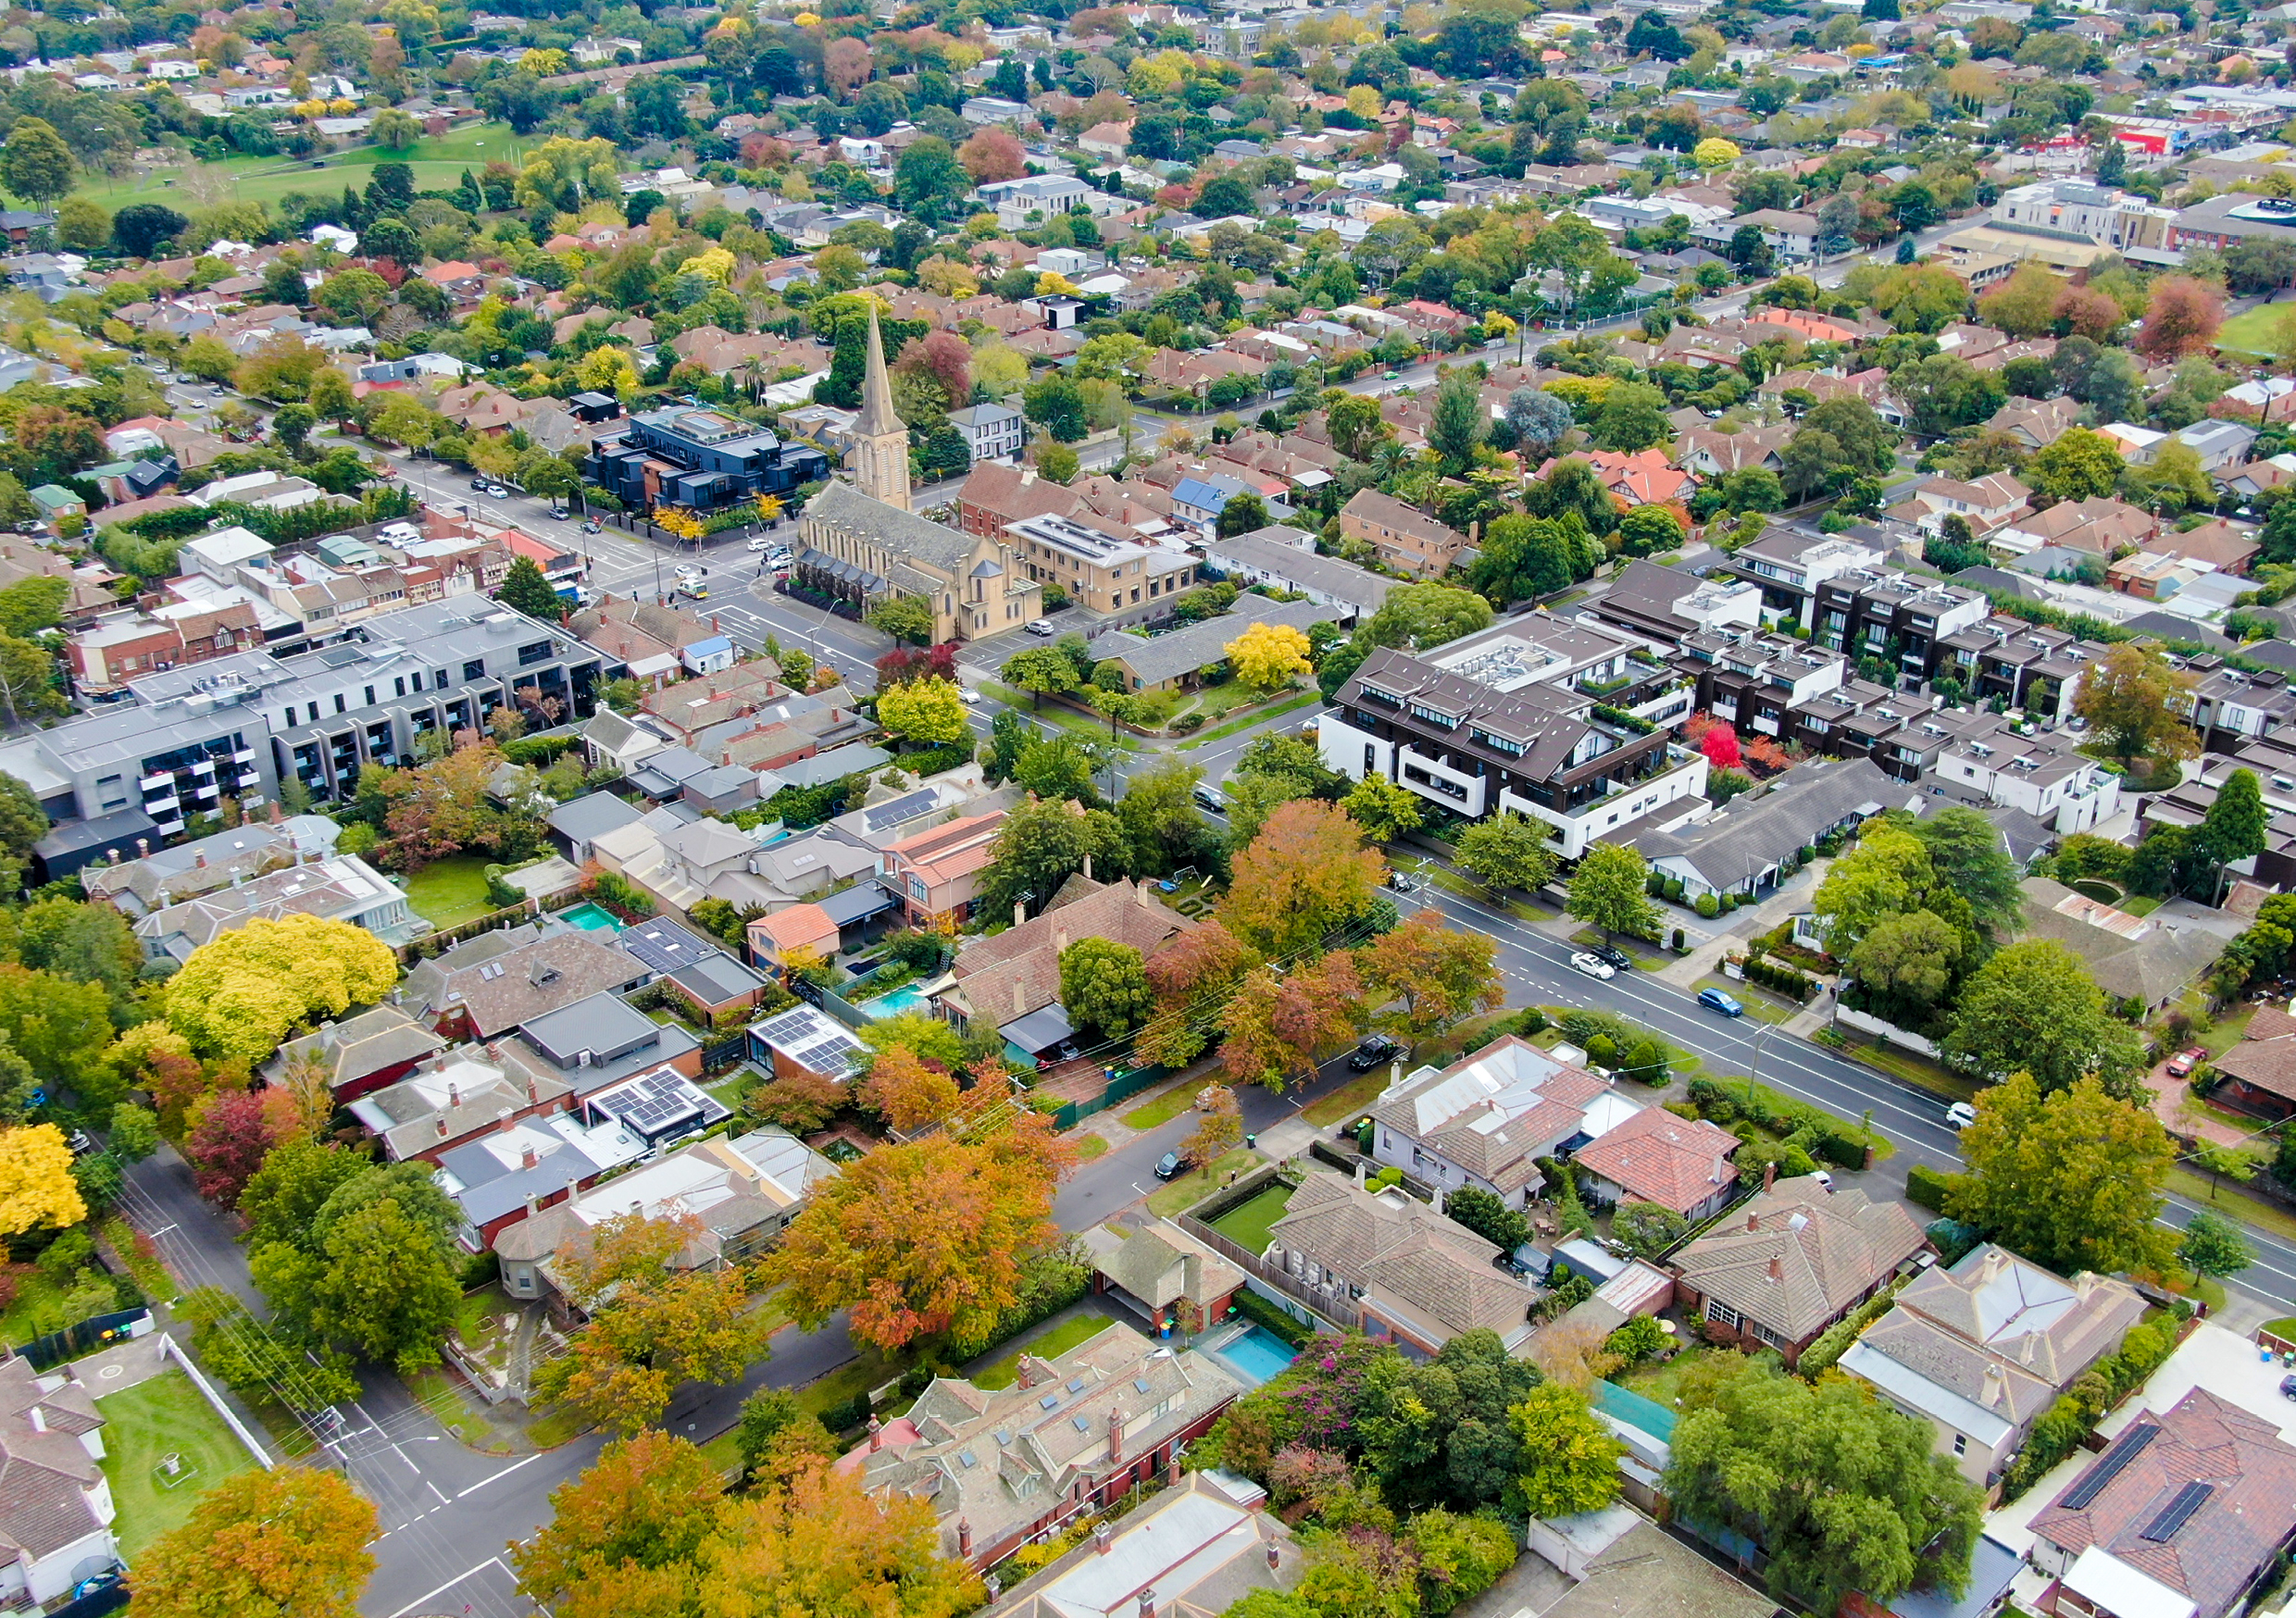 Looking over the intersection of Burke Road and Canterbury Road from the air